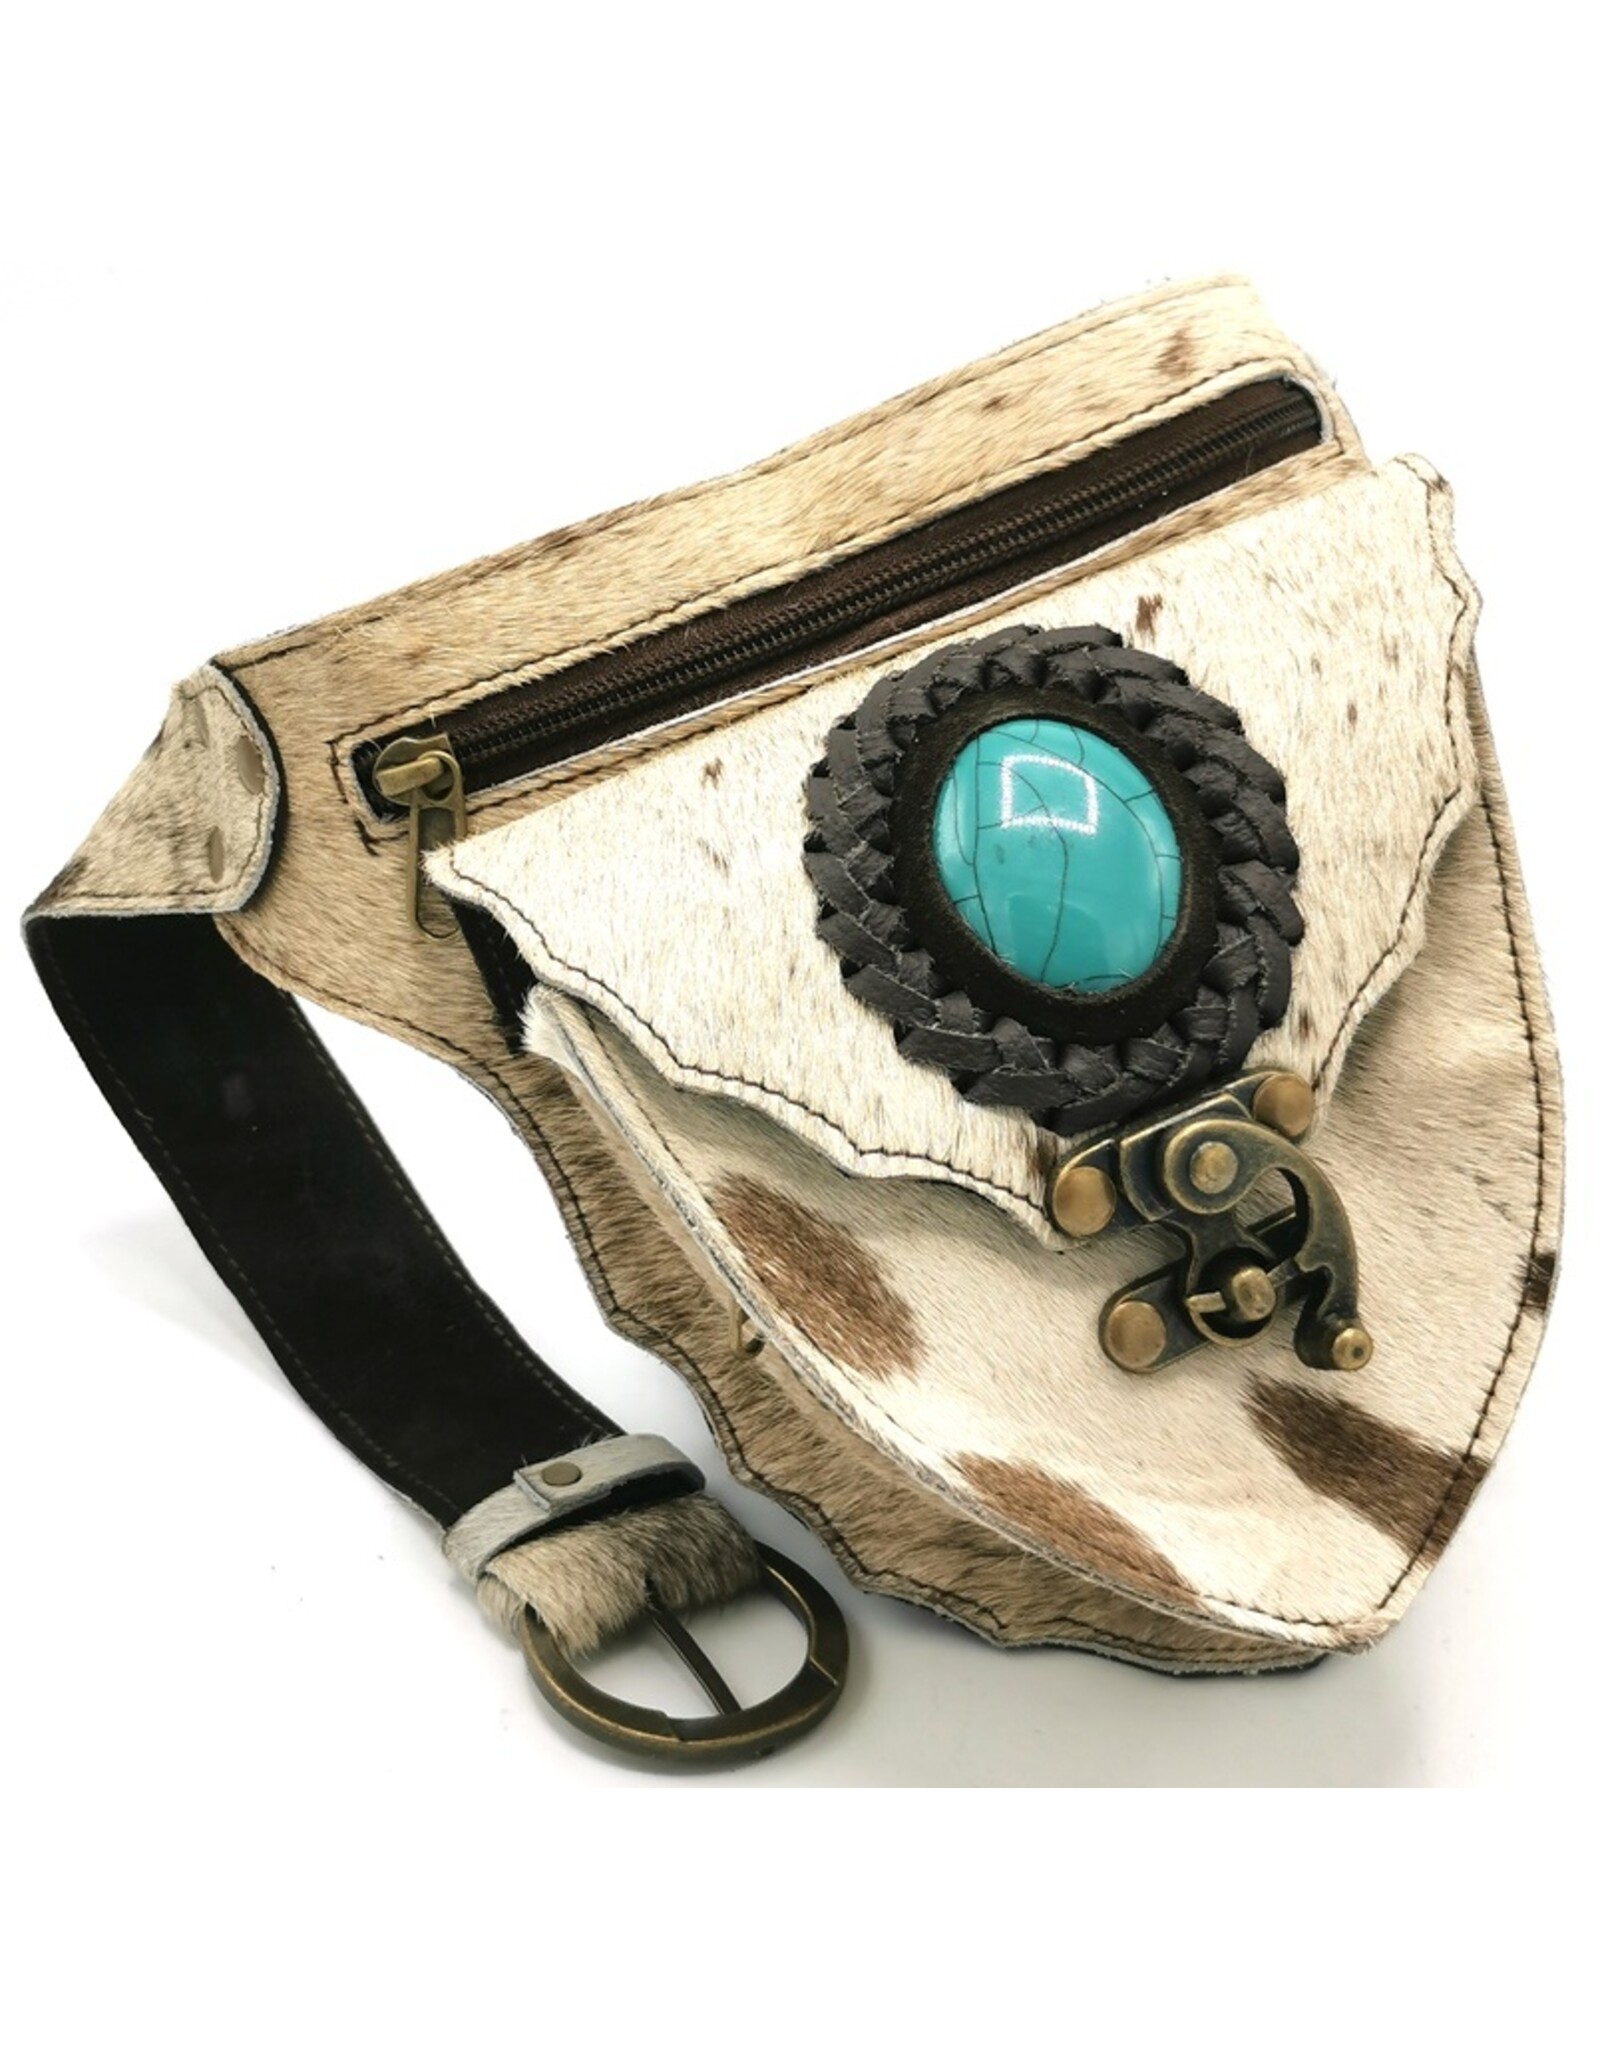 Trukado Leather Festival bags, waist bags and belt bags -   Cowhide Waist Bag with Hook and Turquoise Stone Ibiza